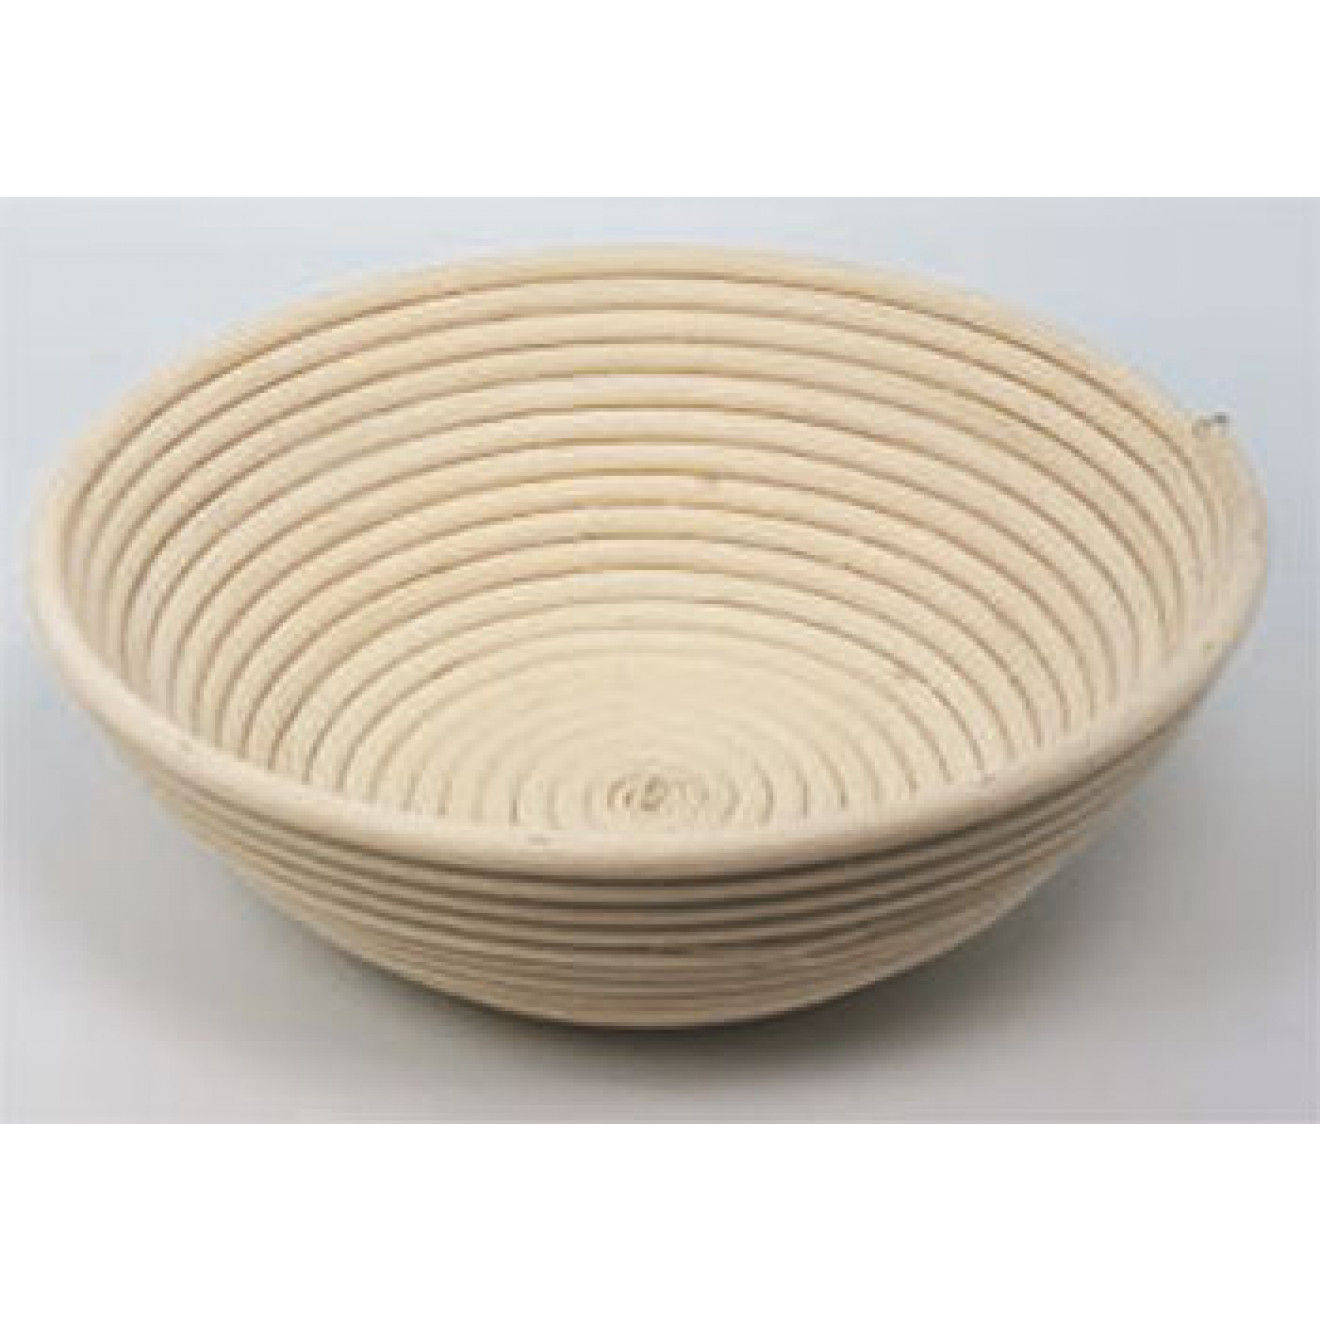 Banneton Bread Proofing Basket bowl 9 inch Baking Bowl Dough Gifts for Bakers Proving proofing basket for Sourdough bread